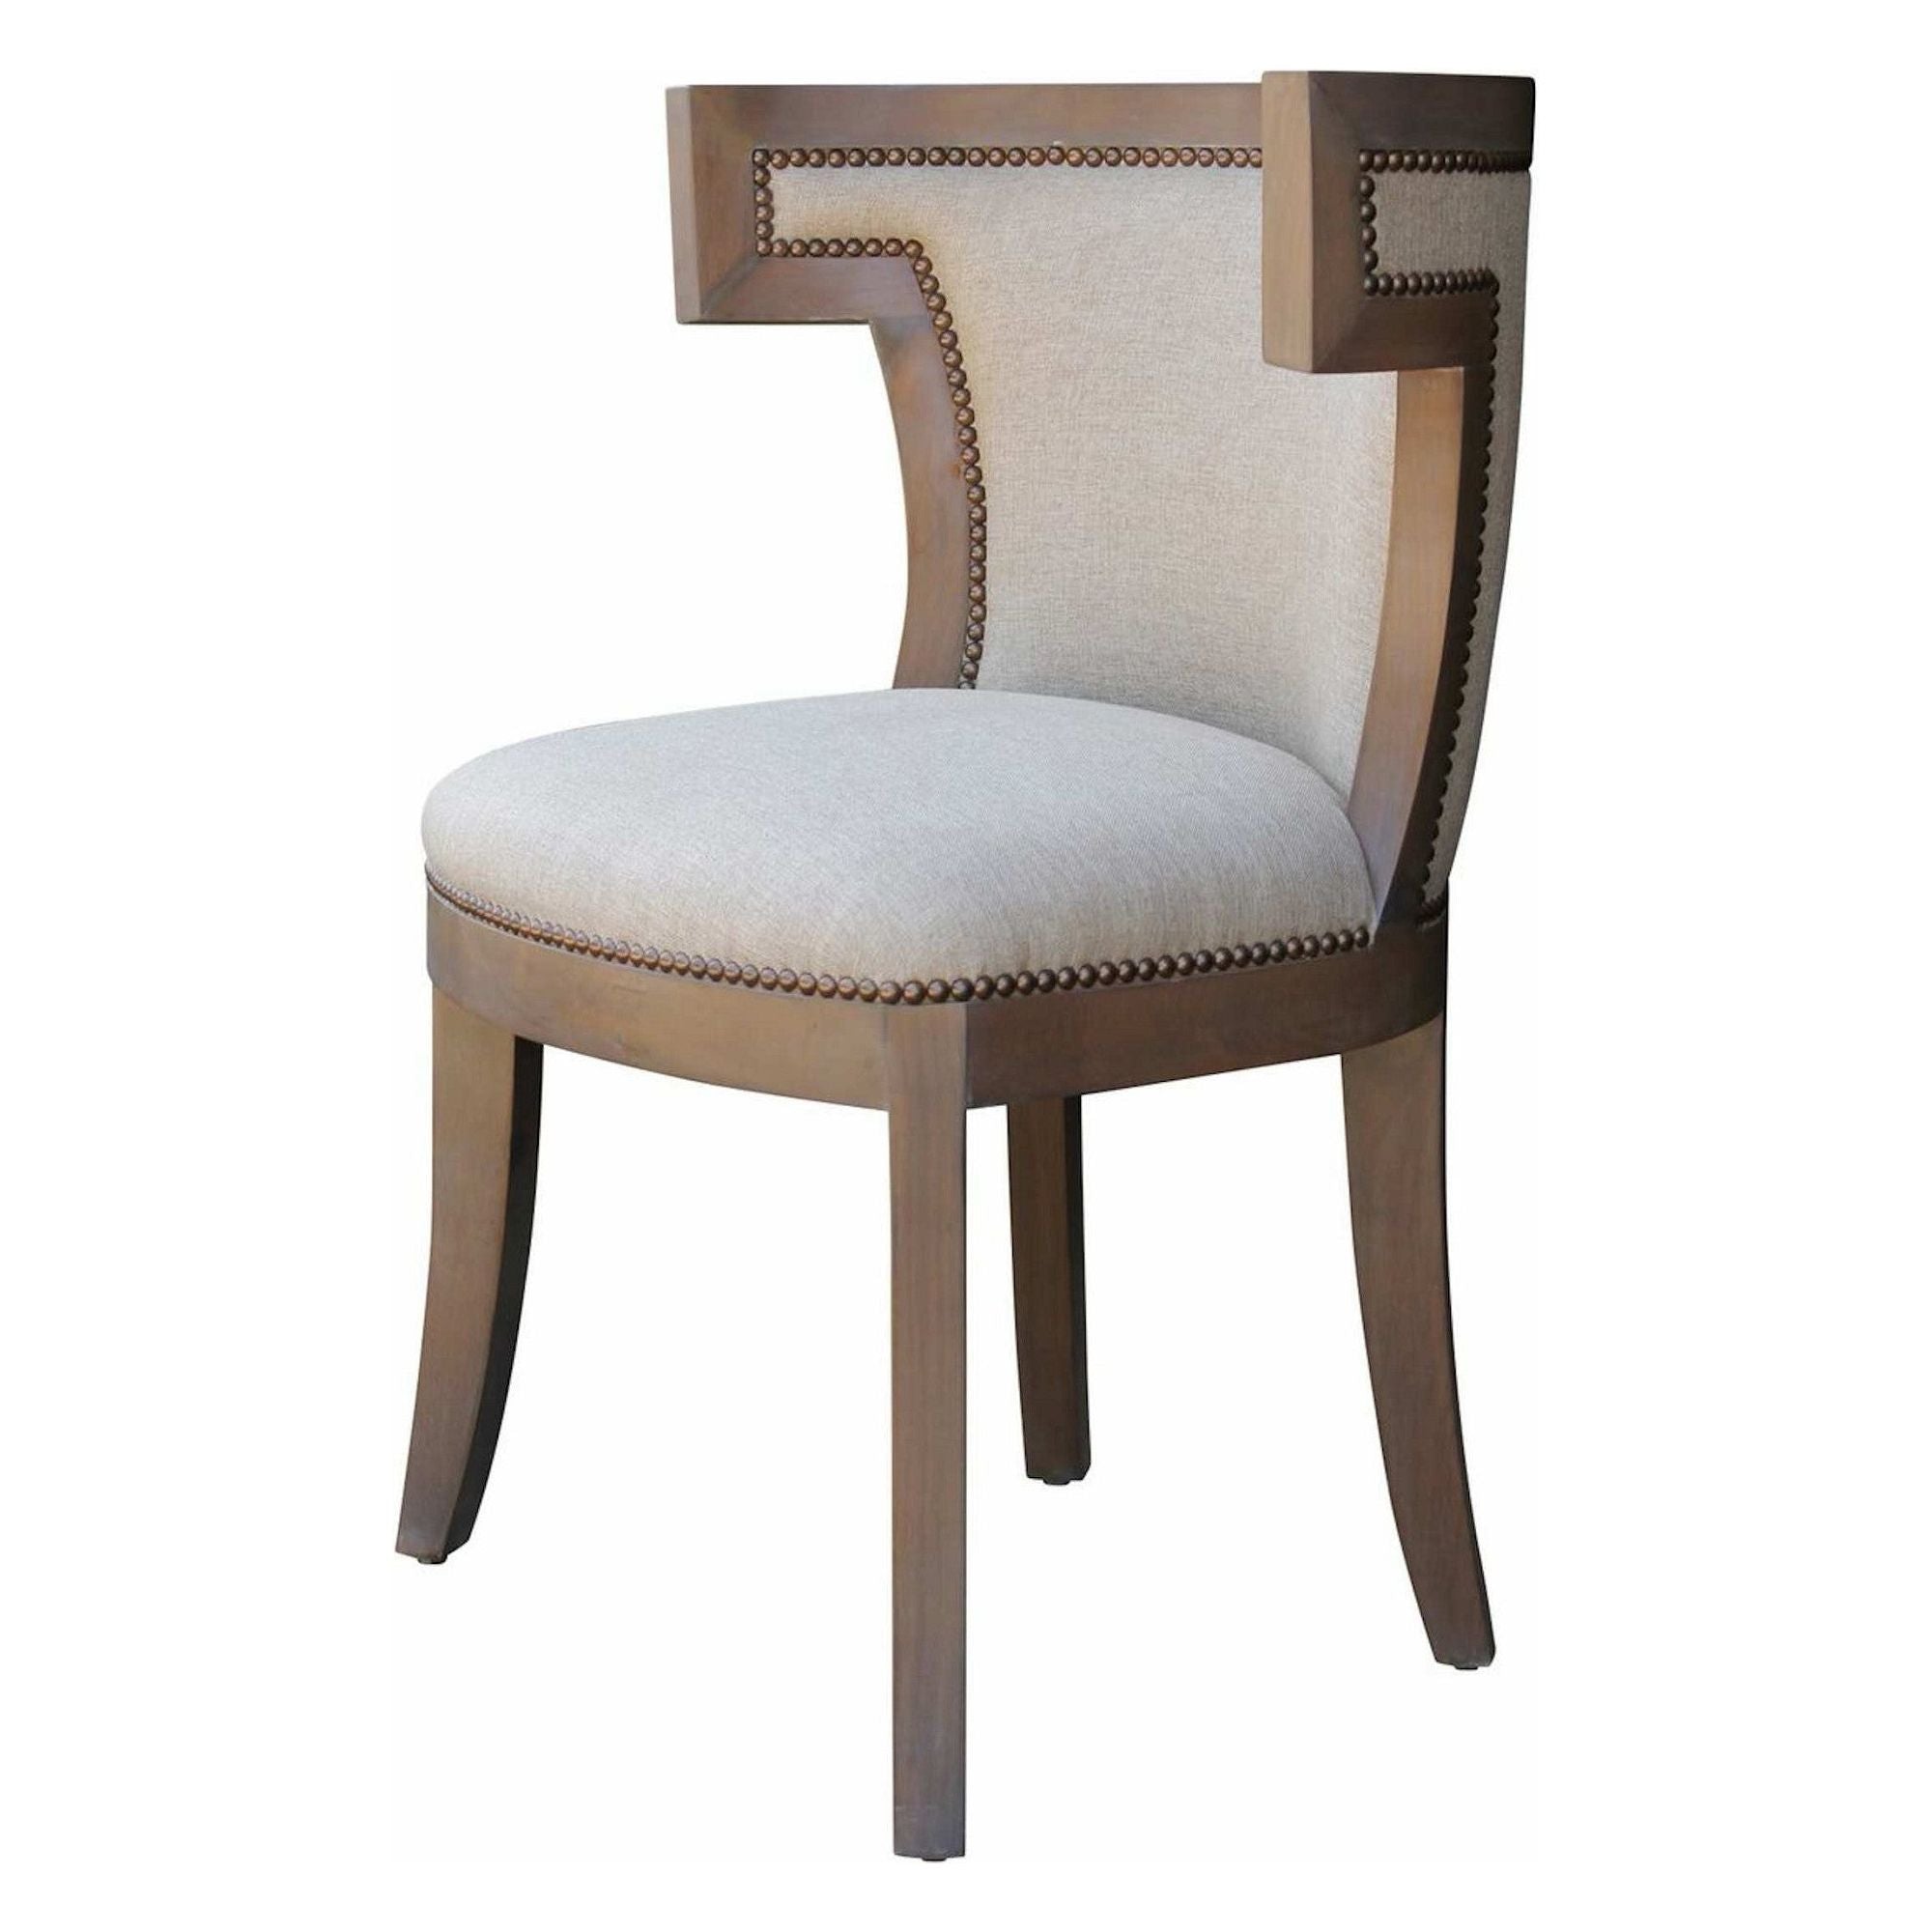 Custom Dining Room Chairs For Every Home Interior Design Style From Modern Chairs Arm And Side Upholstered Chairs Leather And Tufted Chair Mortise Tenon